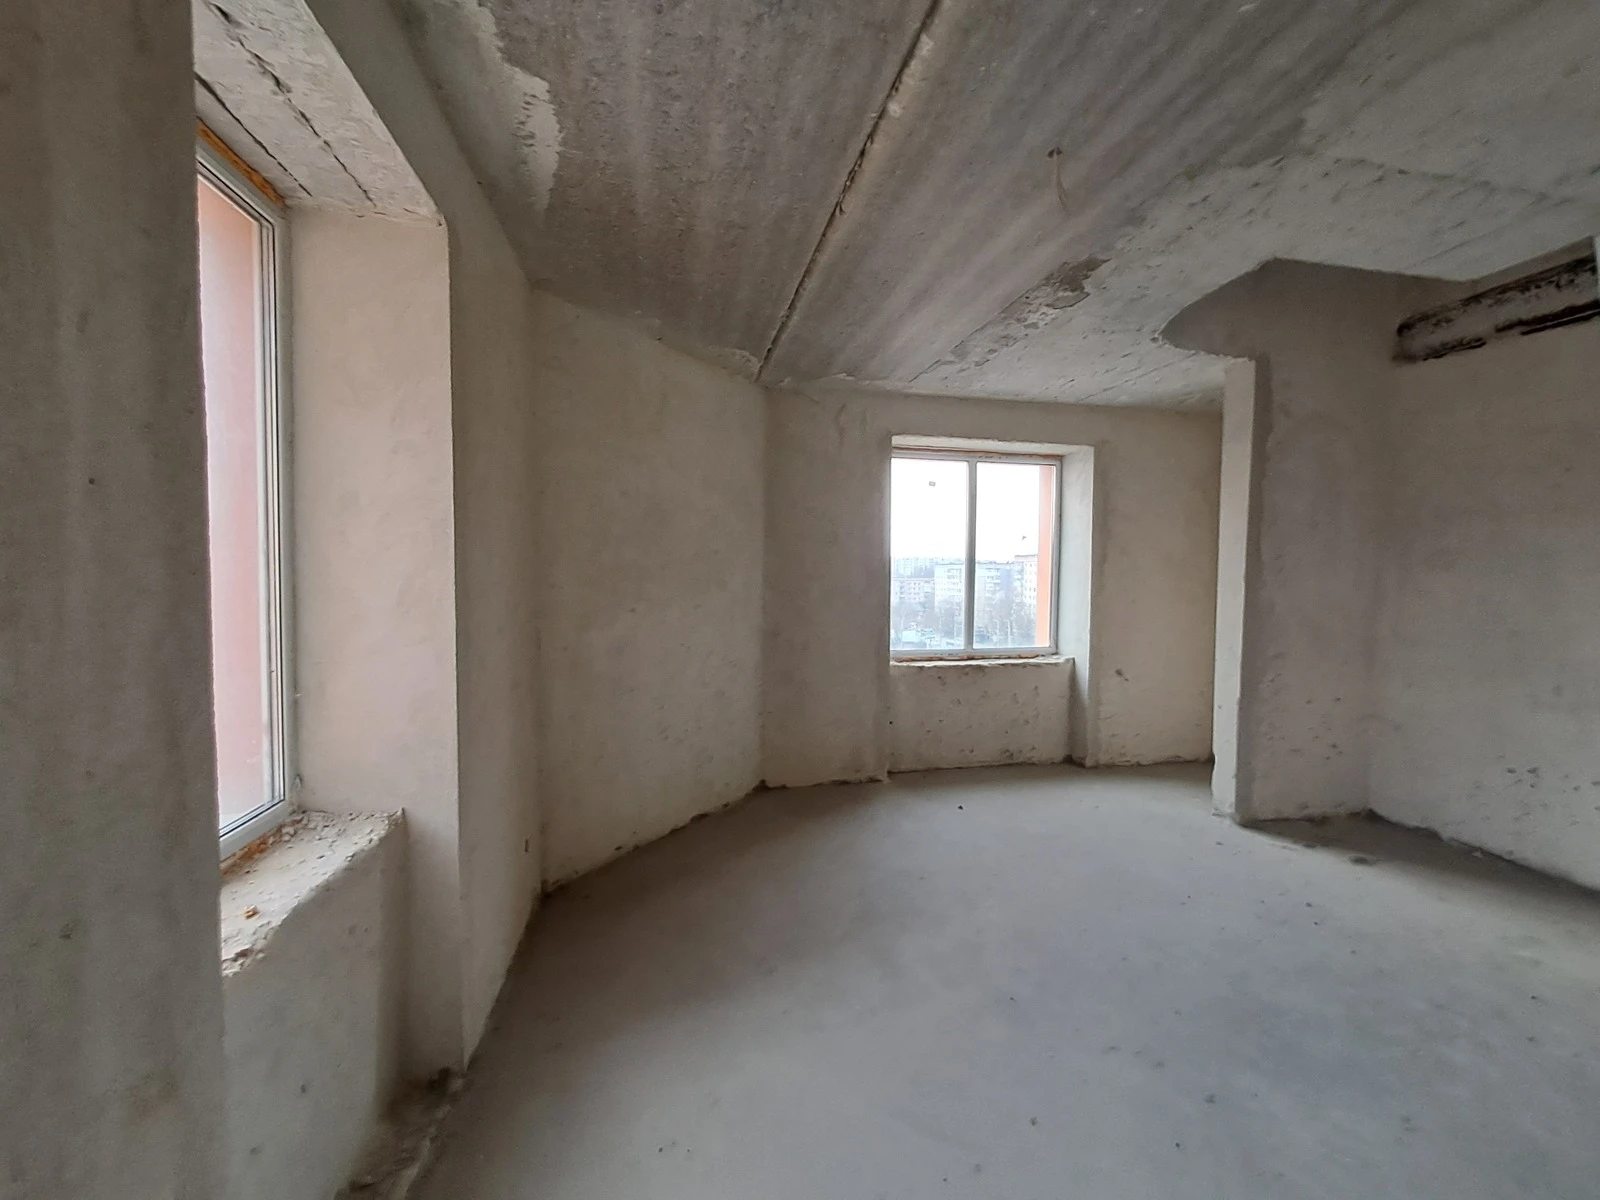 Apartments for sale. 3 rooms, 100 m², 9th floor/9 floors. Bam, Ternopil. 